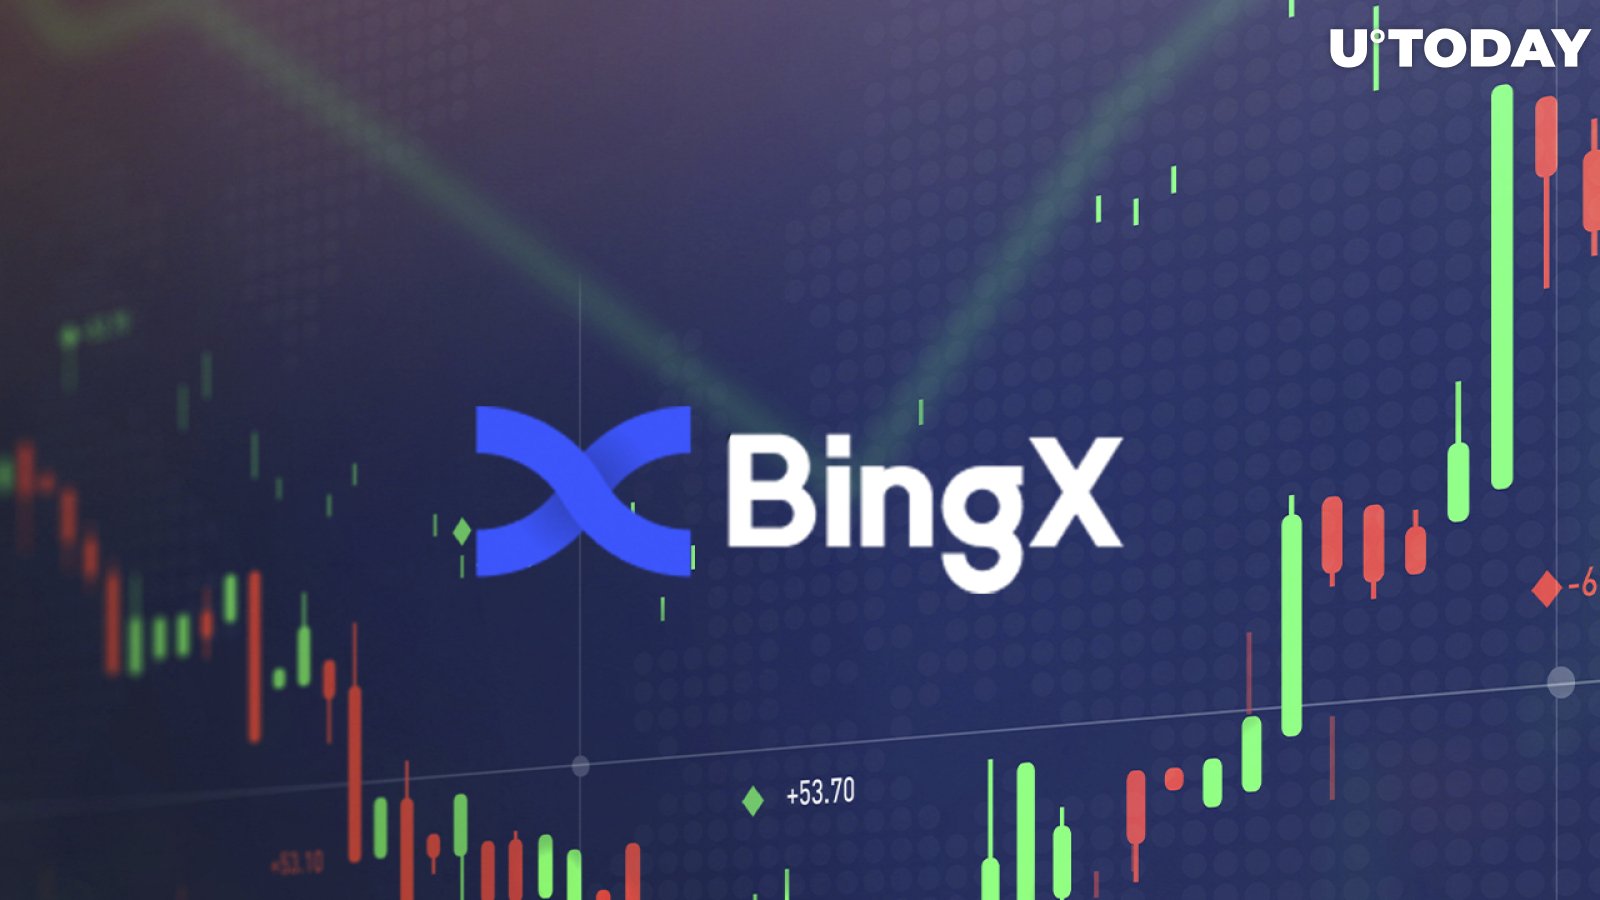 BingX Platform Partnered with WOO Network, Teases Better Prices and Lower Transactional Latency